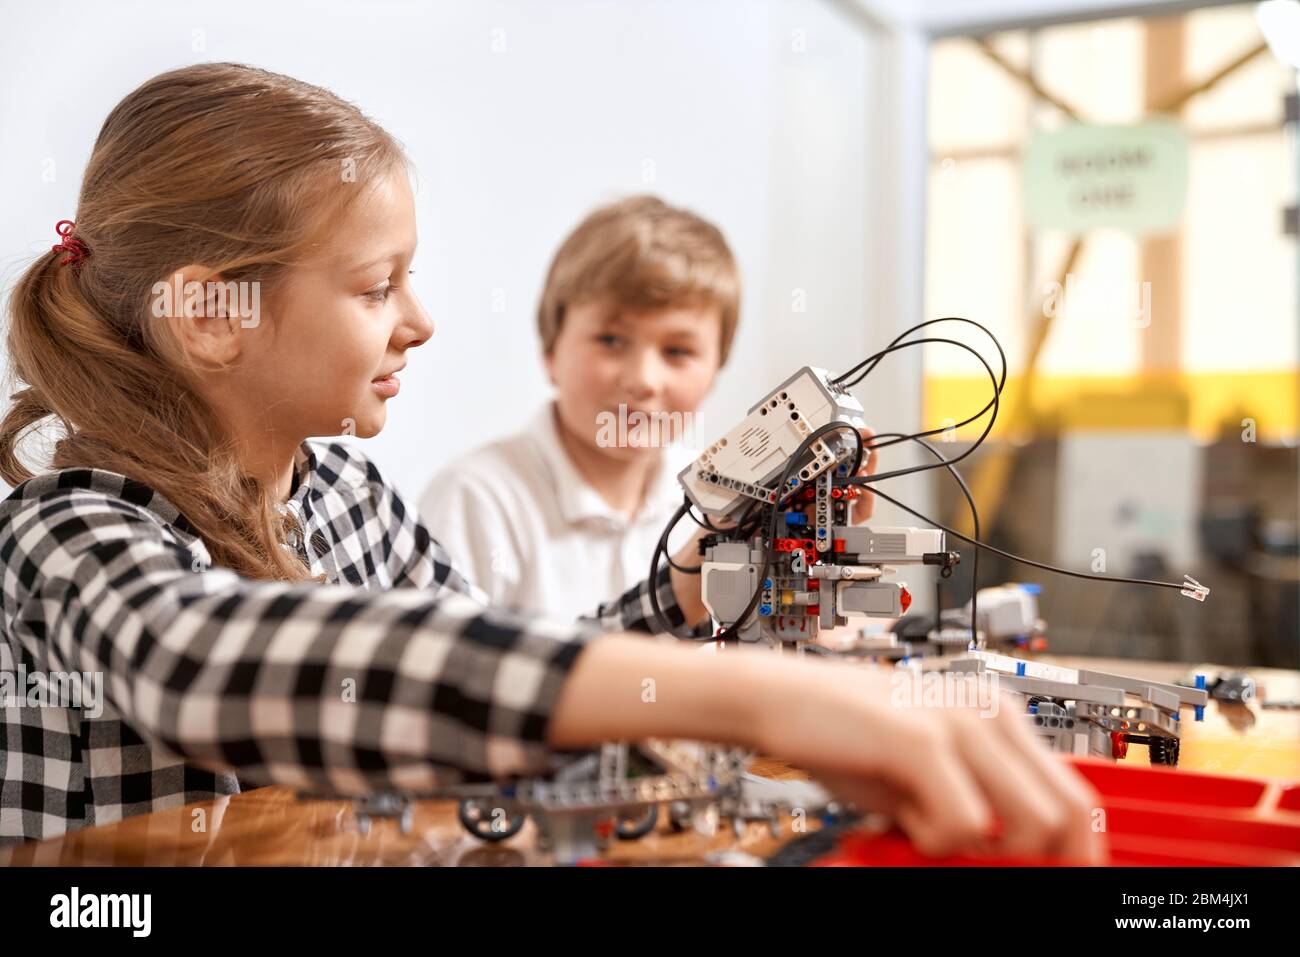 Side view of boy helping girl in creating robot using building kit for kids on table. Science engineering. Nice interested friends smiling, chatting and working on project together. Stock Photo